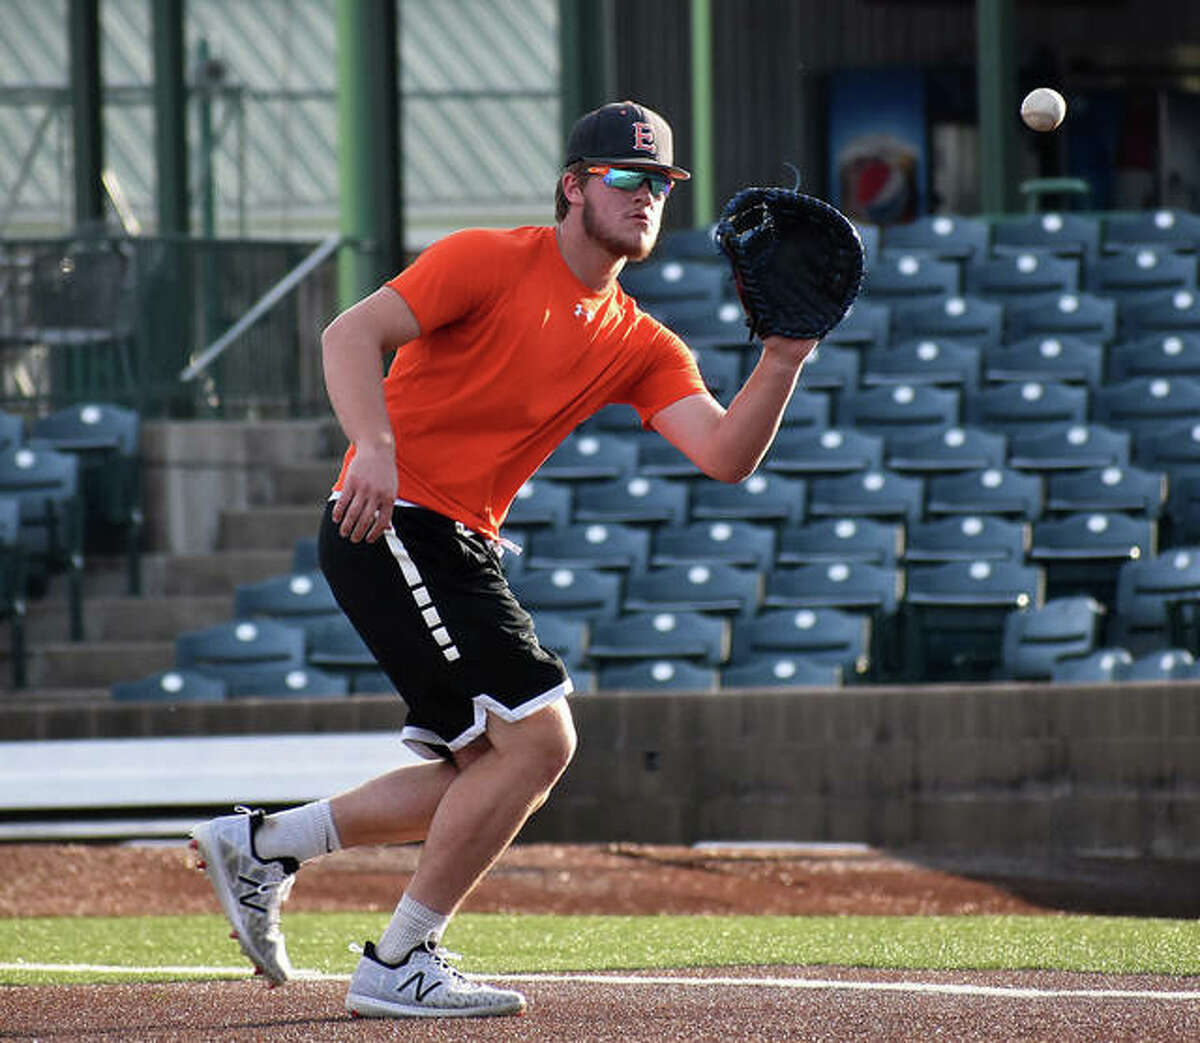 Edwardsville’s Gavin Reames fields a ground ball at first base during an infield drill at Tuesday’s practice inside GCS Stadium in Sauget.